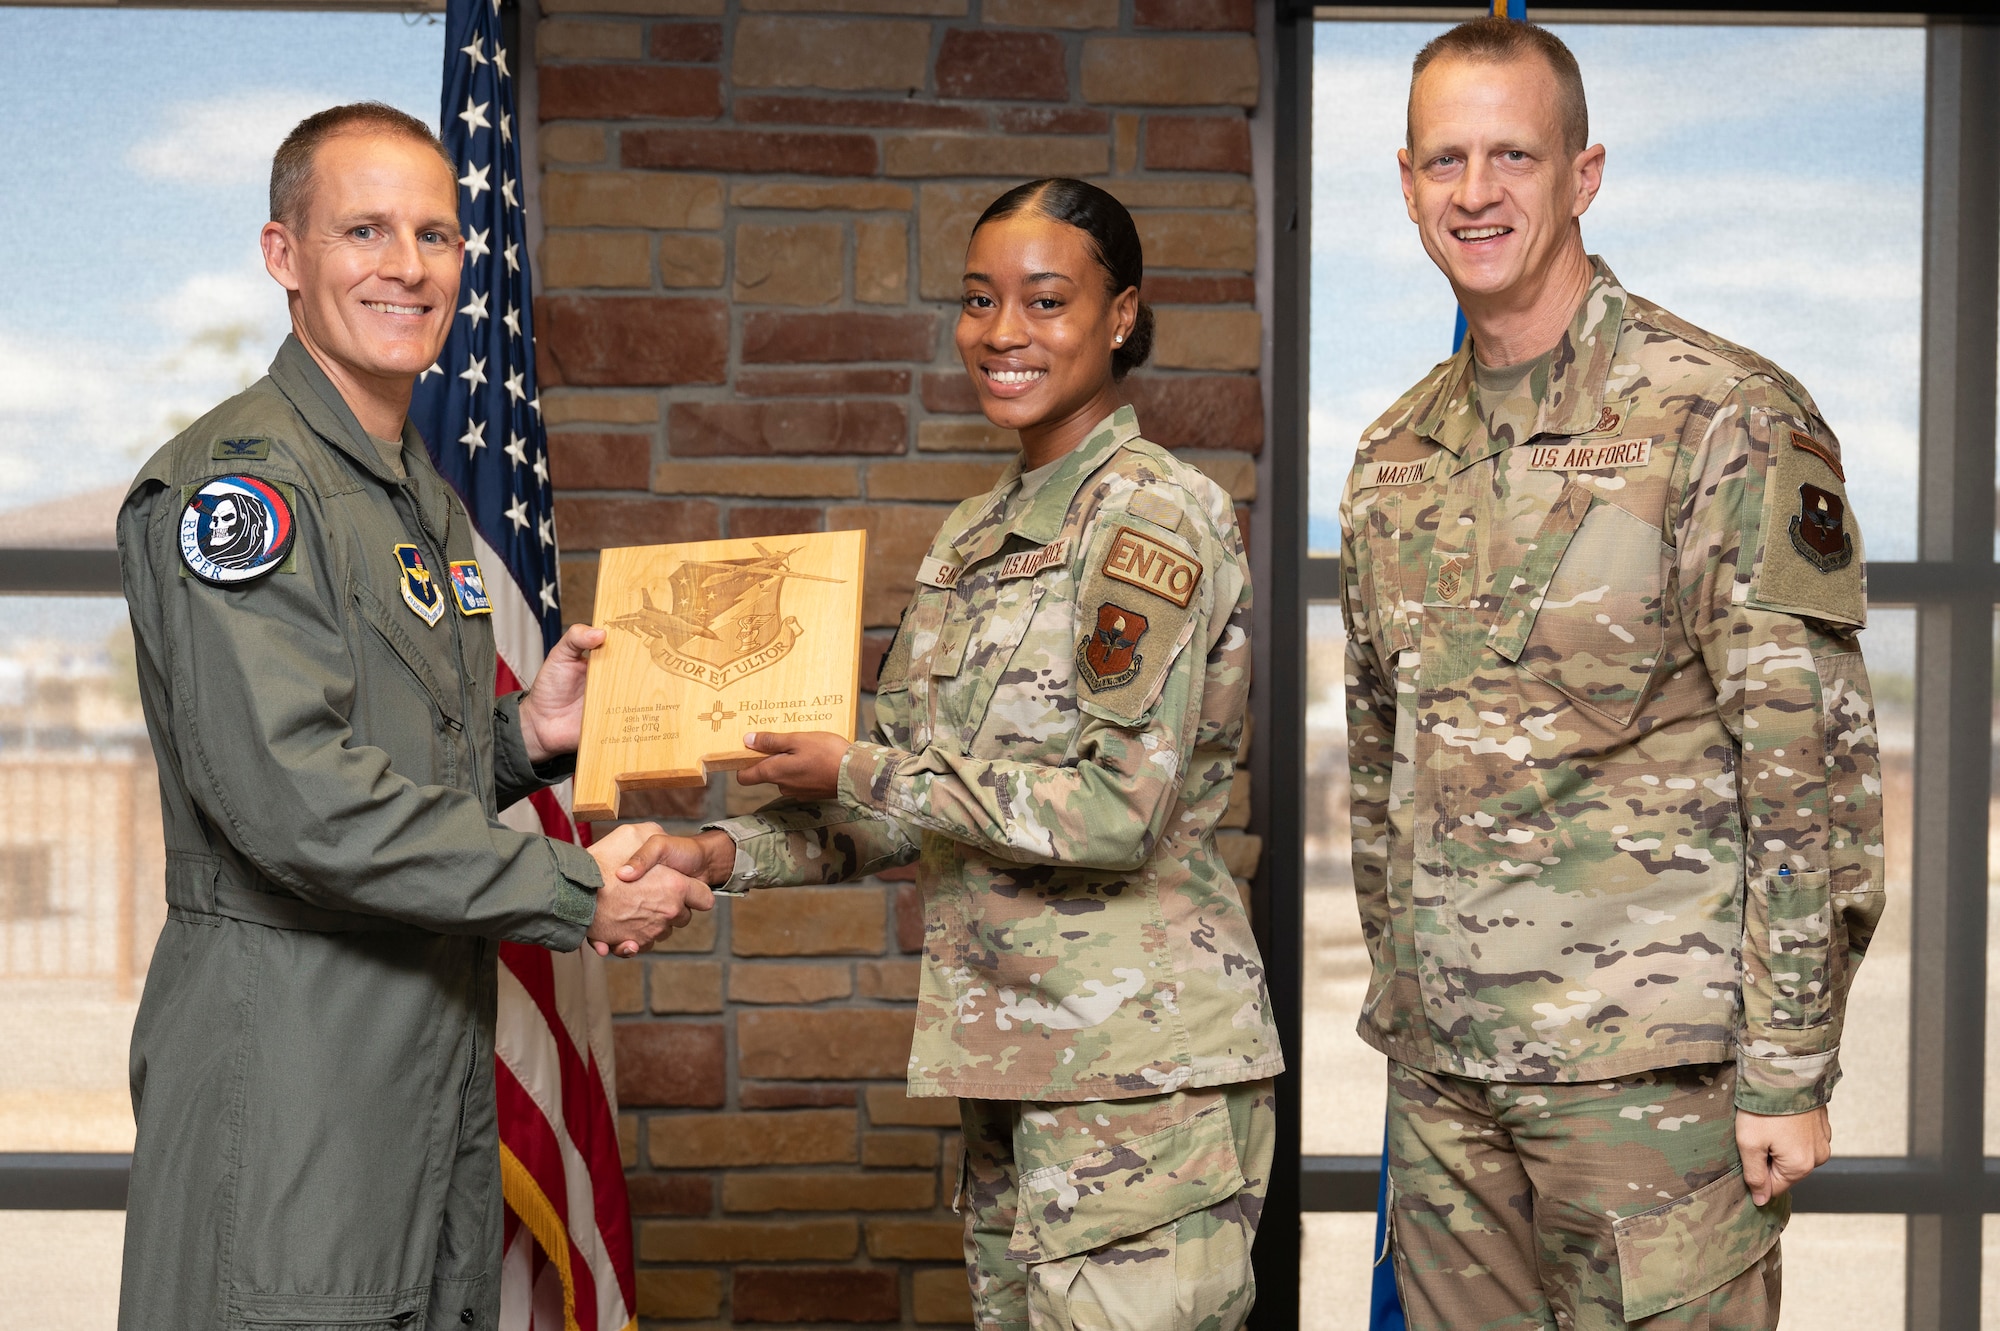 U.S. Air Force Airman 1st Class Abrianna Harvey, from the 49th Civil Engineer Squadron, accepts the 49th Wing Second Quarter 49er Award, during the 49th Wing’s 2nd Quarter Award ceremony at Holloman Air Force Base, New Mexico, Aug. 11, 2023. Quarterly award winners were selected based on their technical expertise, demonstration of leadership and job performance. (U.S. Air Force photo by Airman 1st Class Michelle Ferrari)